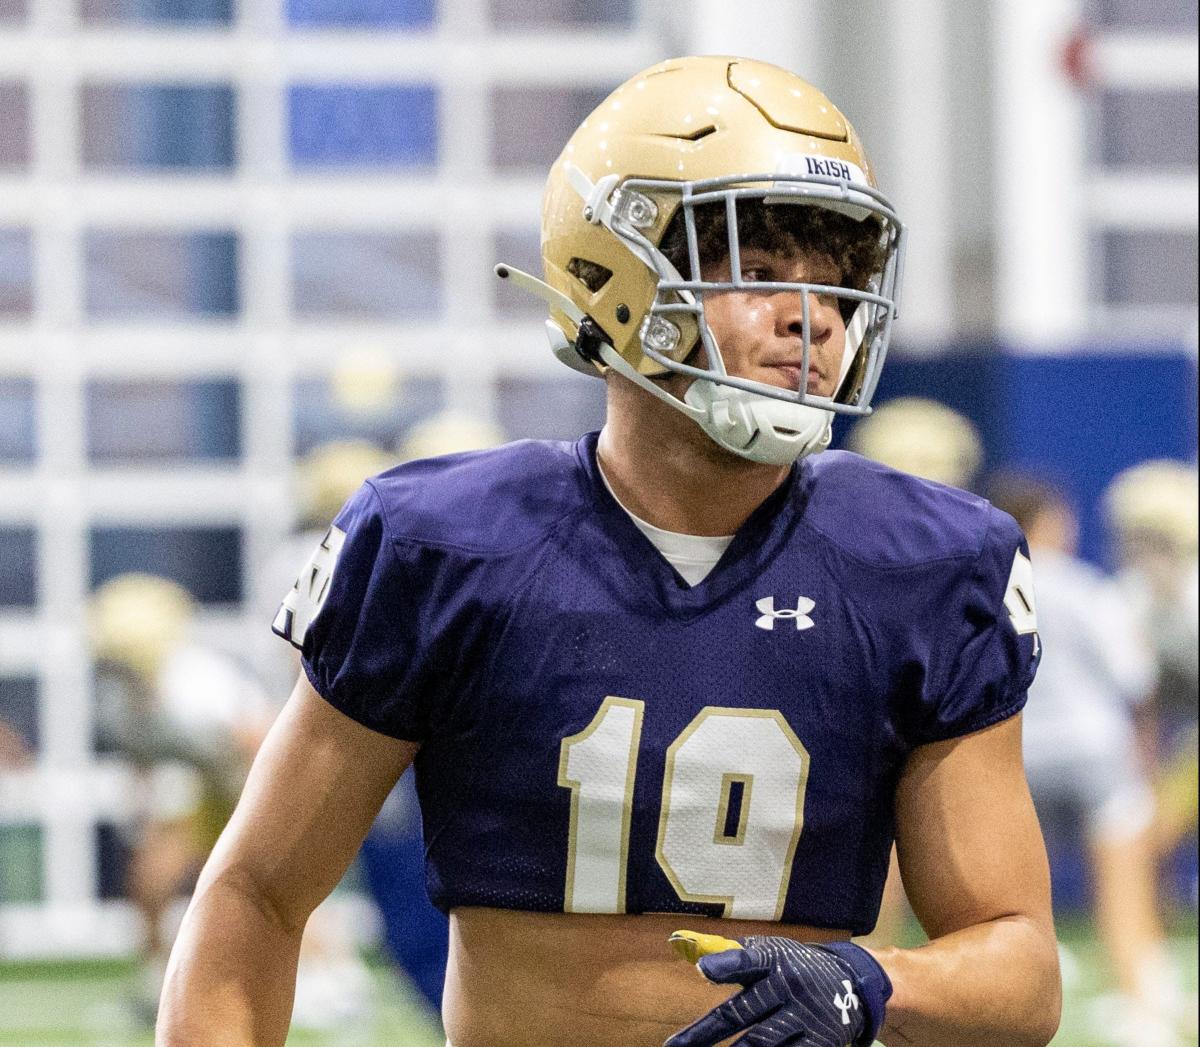 Hot New] What Are The Notre Dame Football Uniforms For 2023: Get